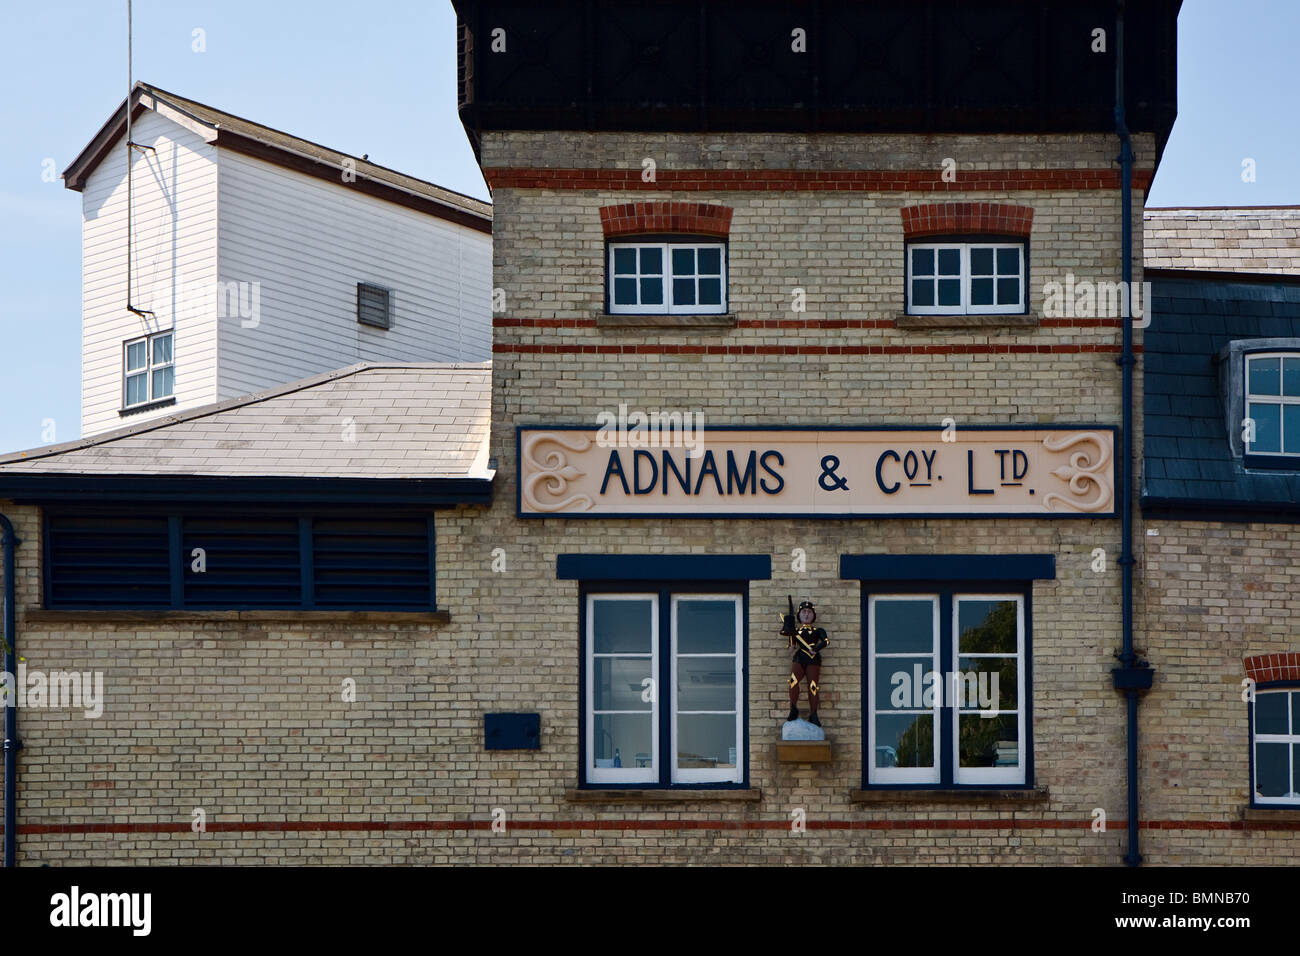 Adnams & Coy. Ltd. brewery in Southwold Suffolk Stock Photo